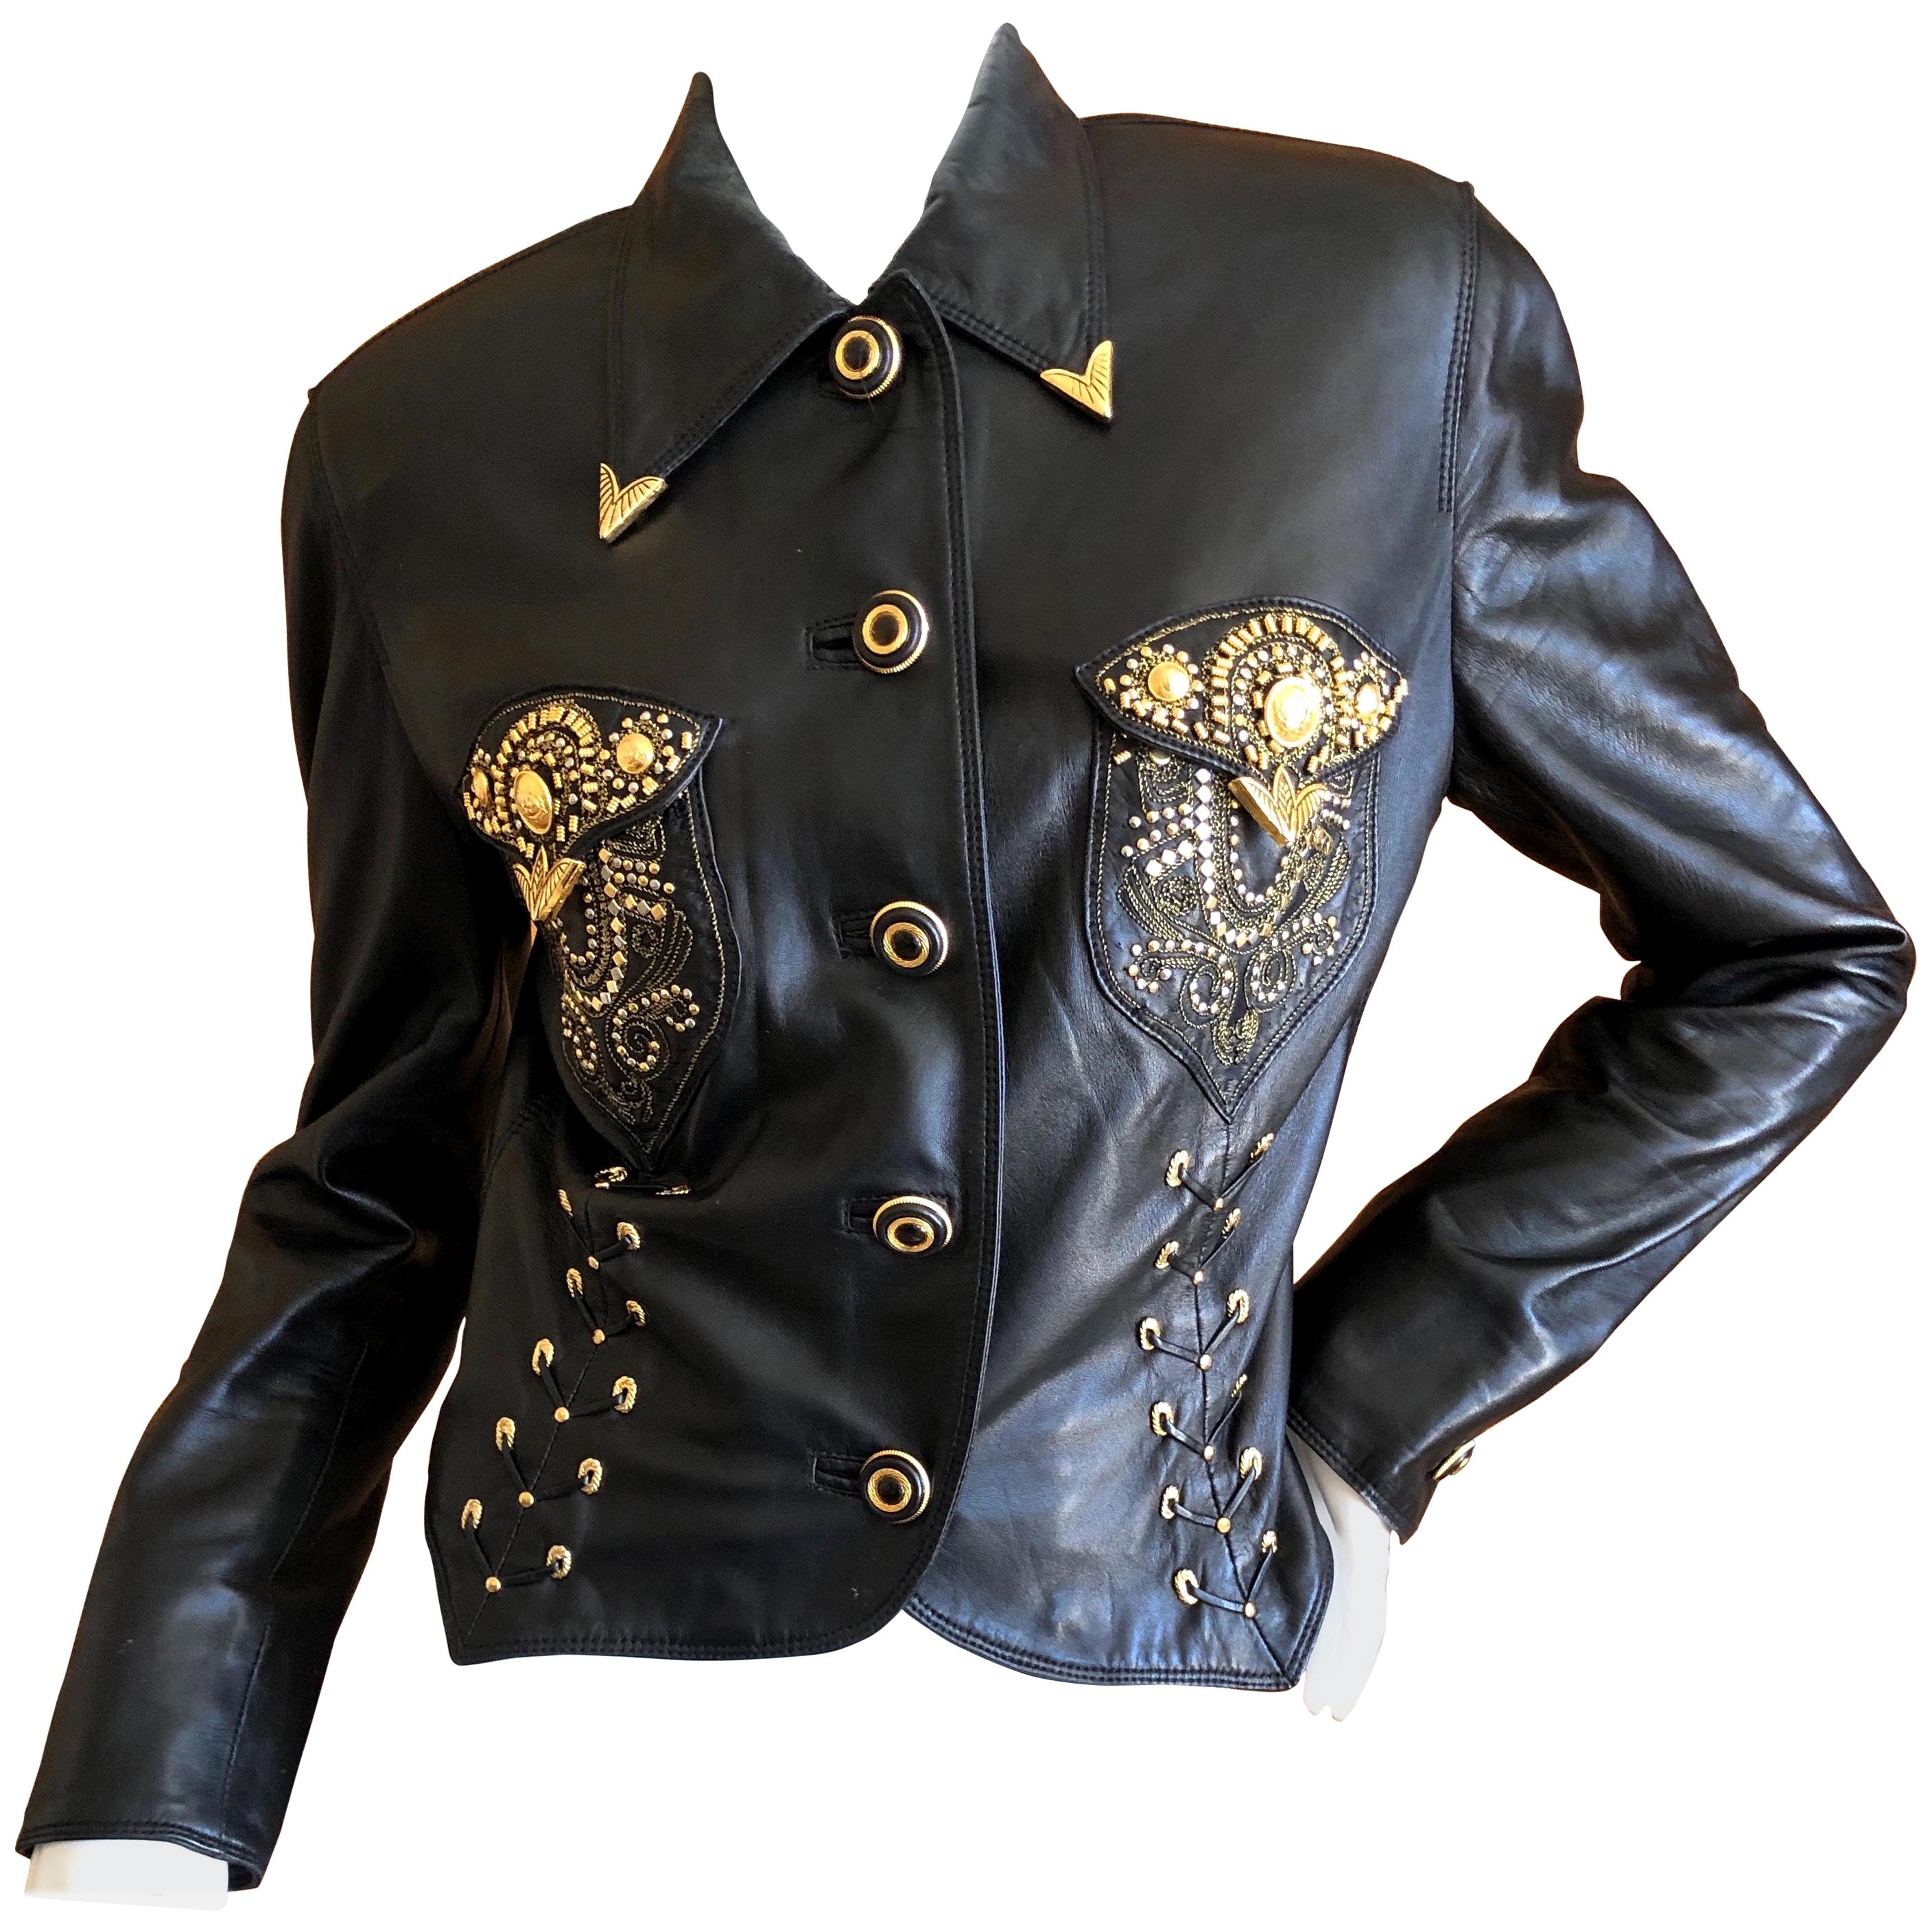 Gianni Versace 1990 Lambskin Leather Moto Jacket with Gold Embellishment For Sale